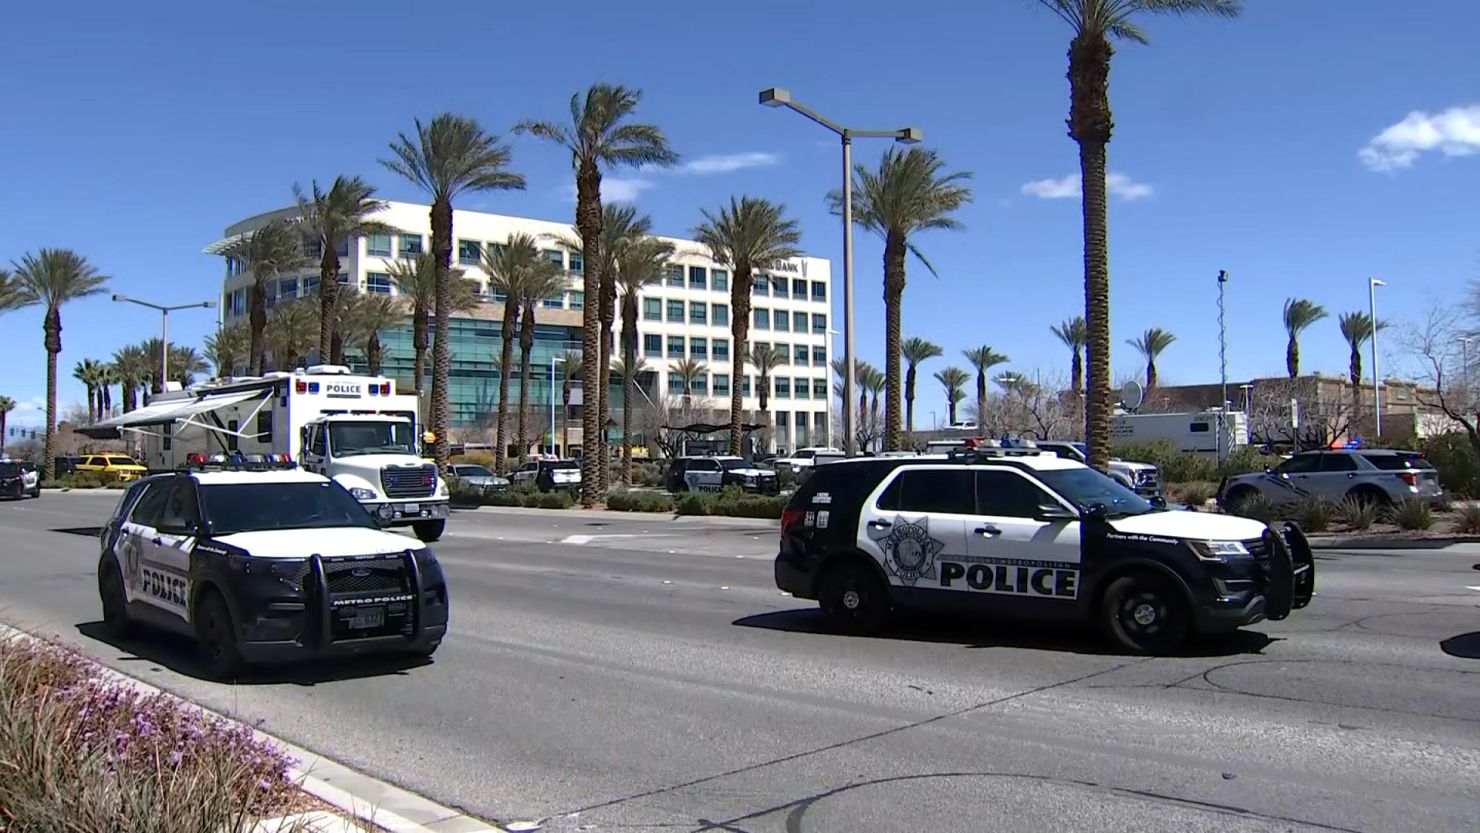 Police are seen at the scene of a shooting in Summerlin, Nevada, on Monday.